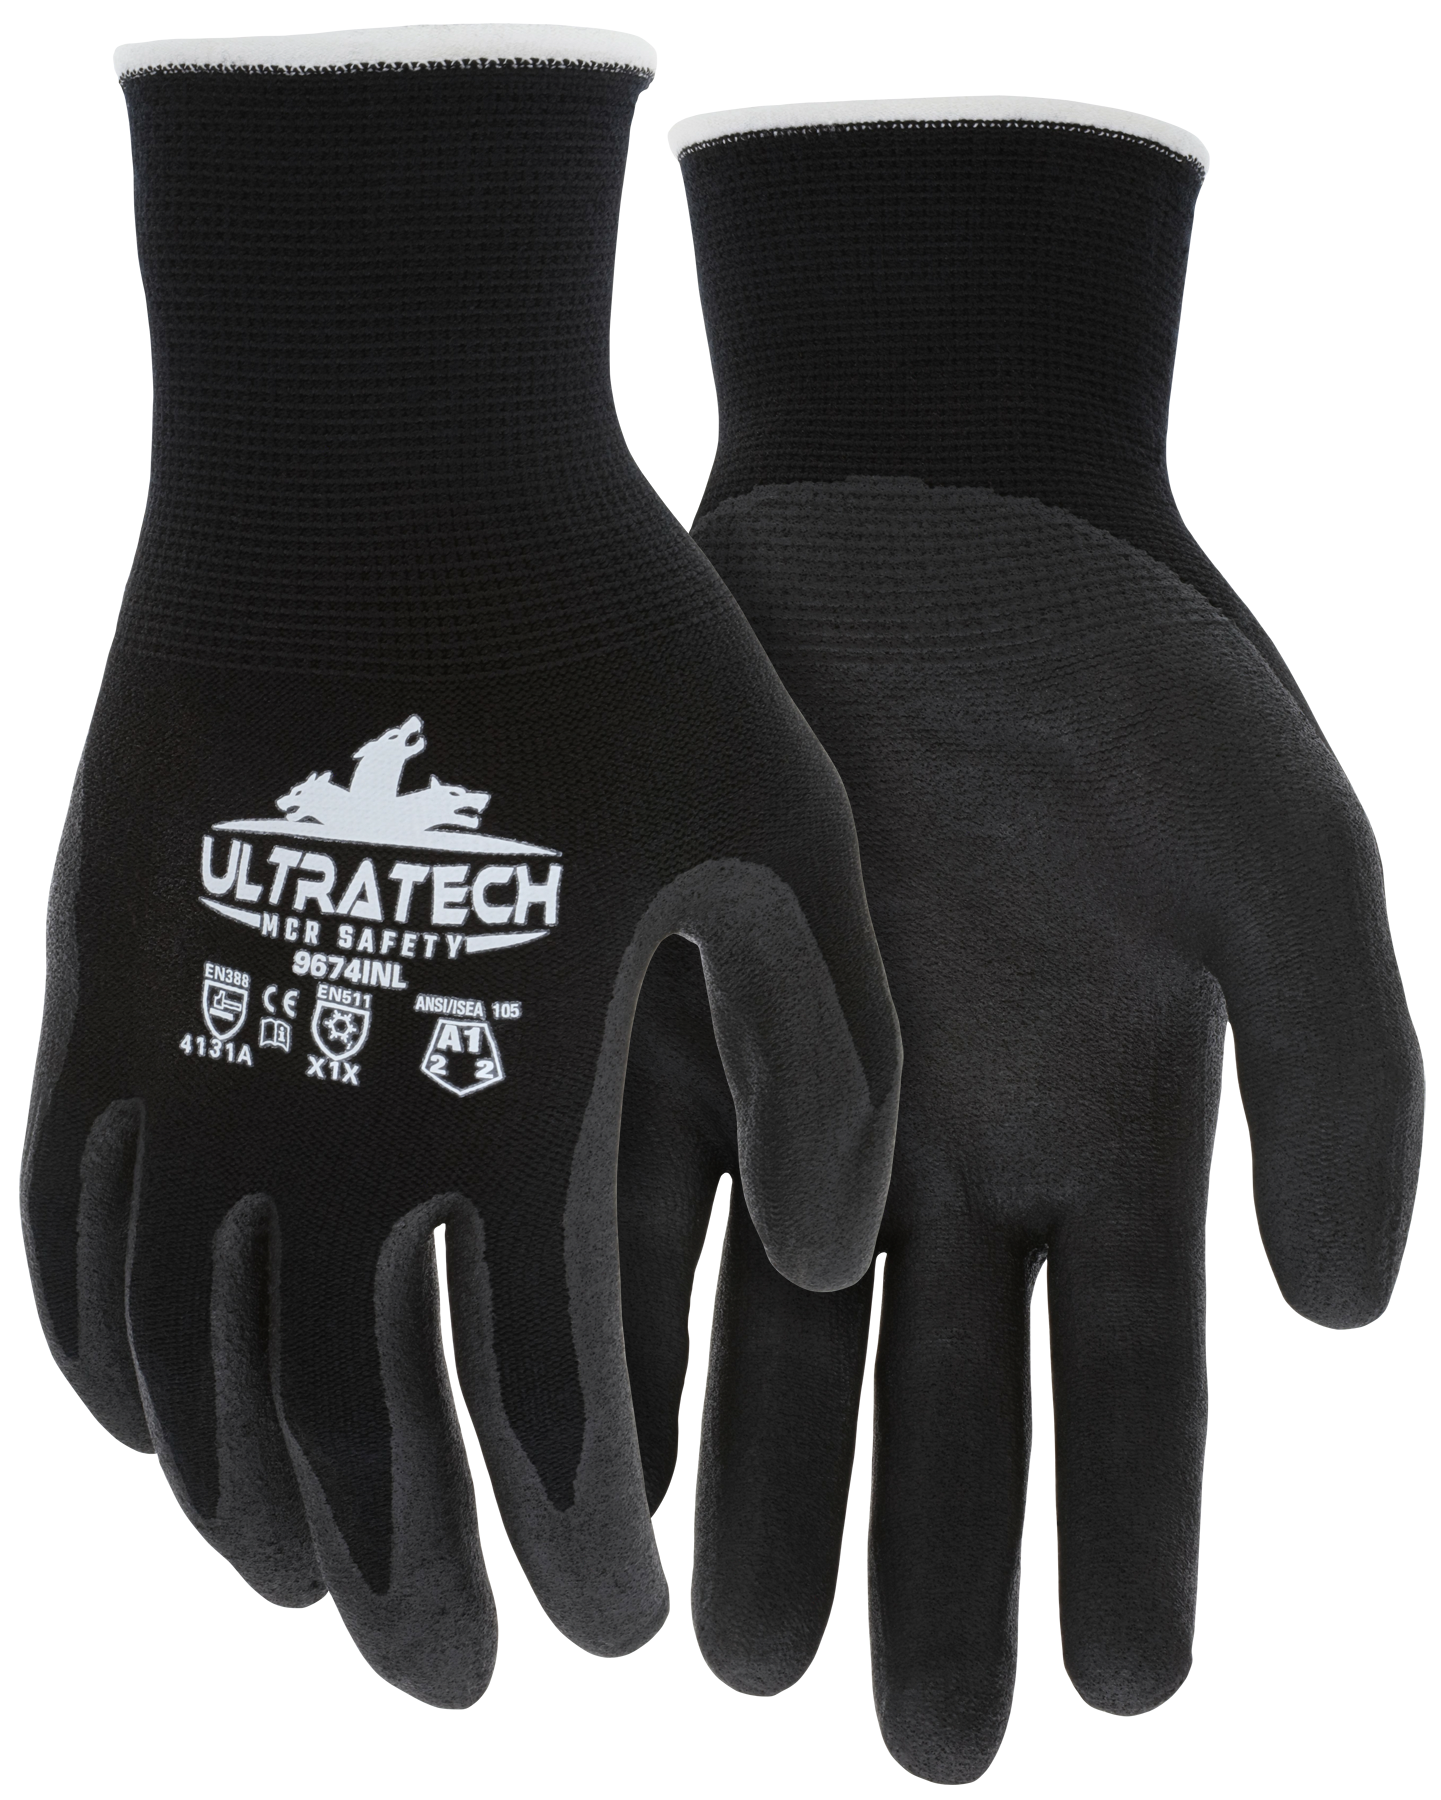 FIRM GRIP Large Winter Performance Grip Gloves with Insulated